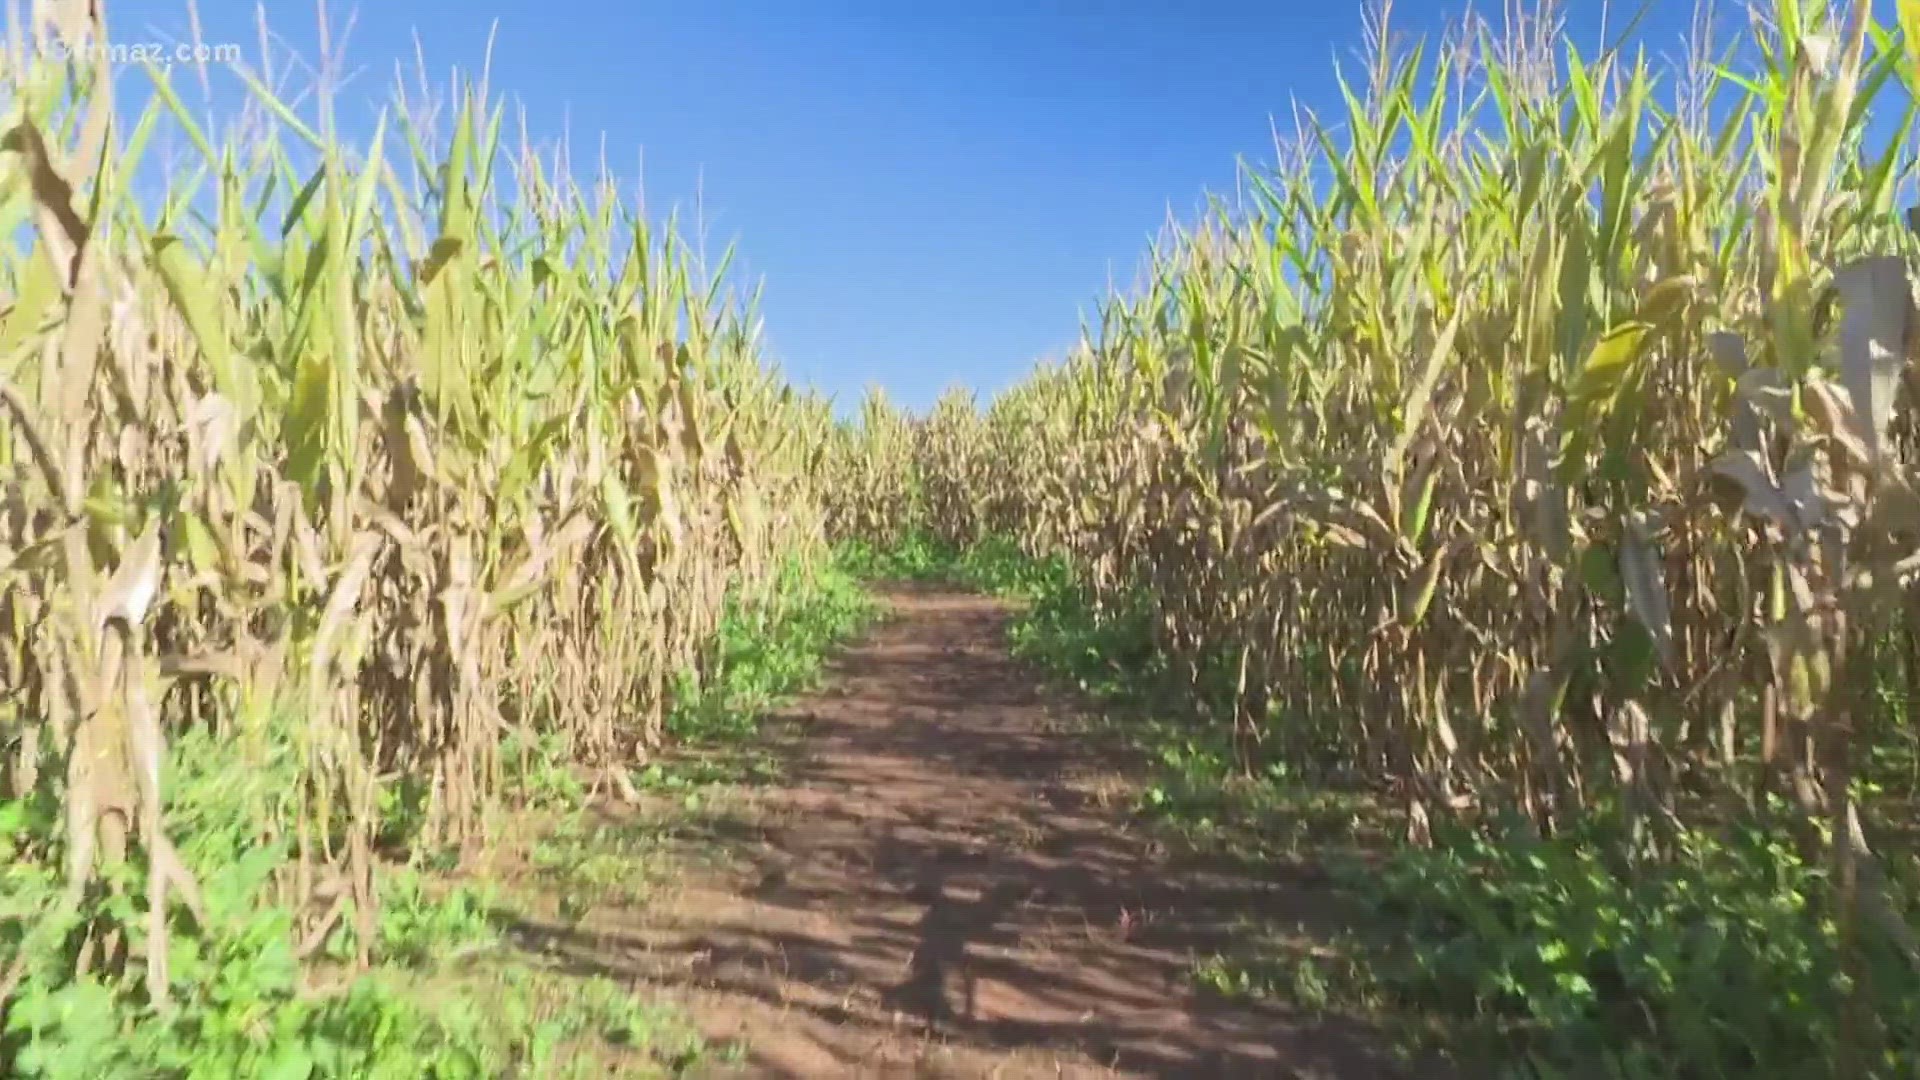 While this Fort Valley sight is most known for its Peaches, when fall comes around, they shift gears to corn mazes.